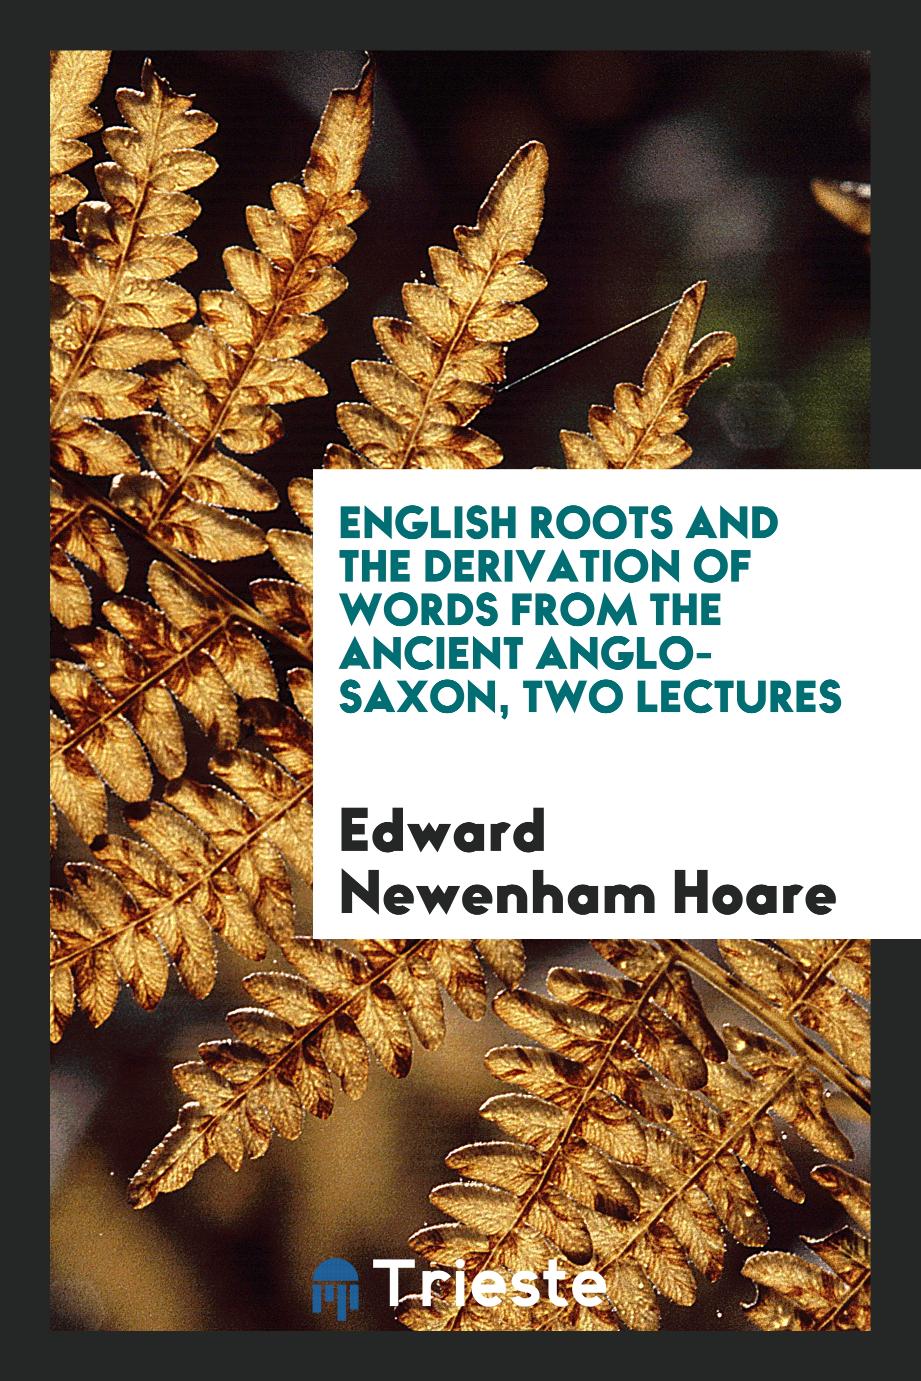 English roots and the derivation of words from the ancient Anglo-Saxon, two lectures